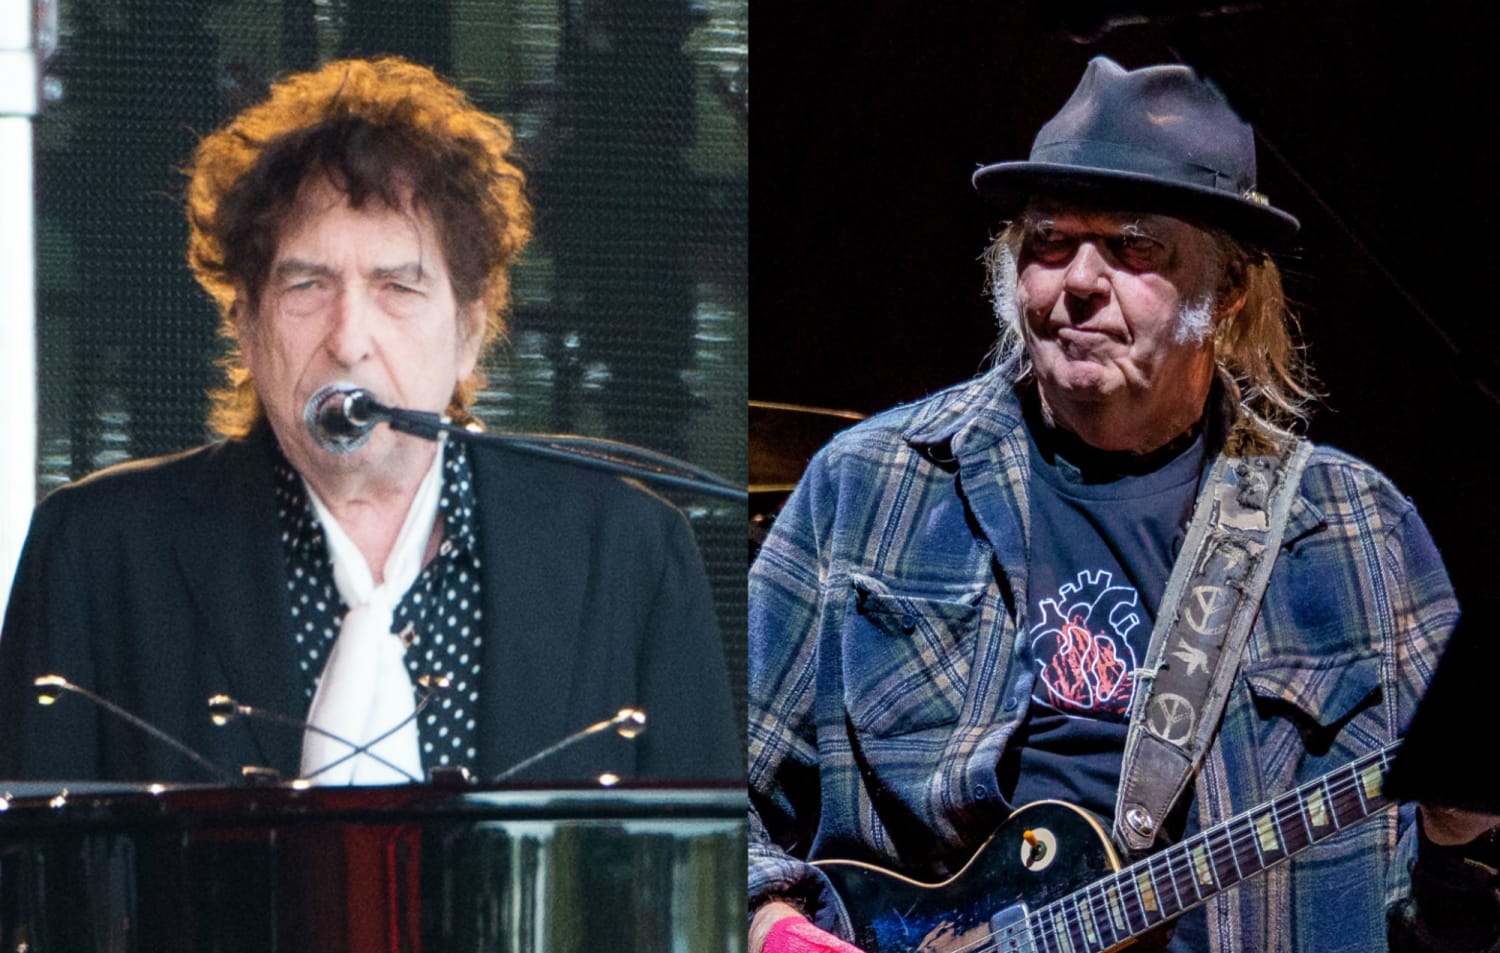 Watch Bob Dylan and Neil Young perform together for the first time in 25 years